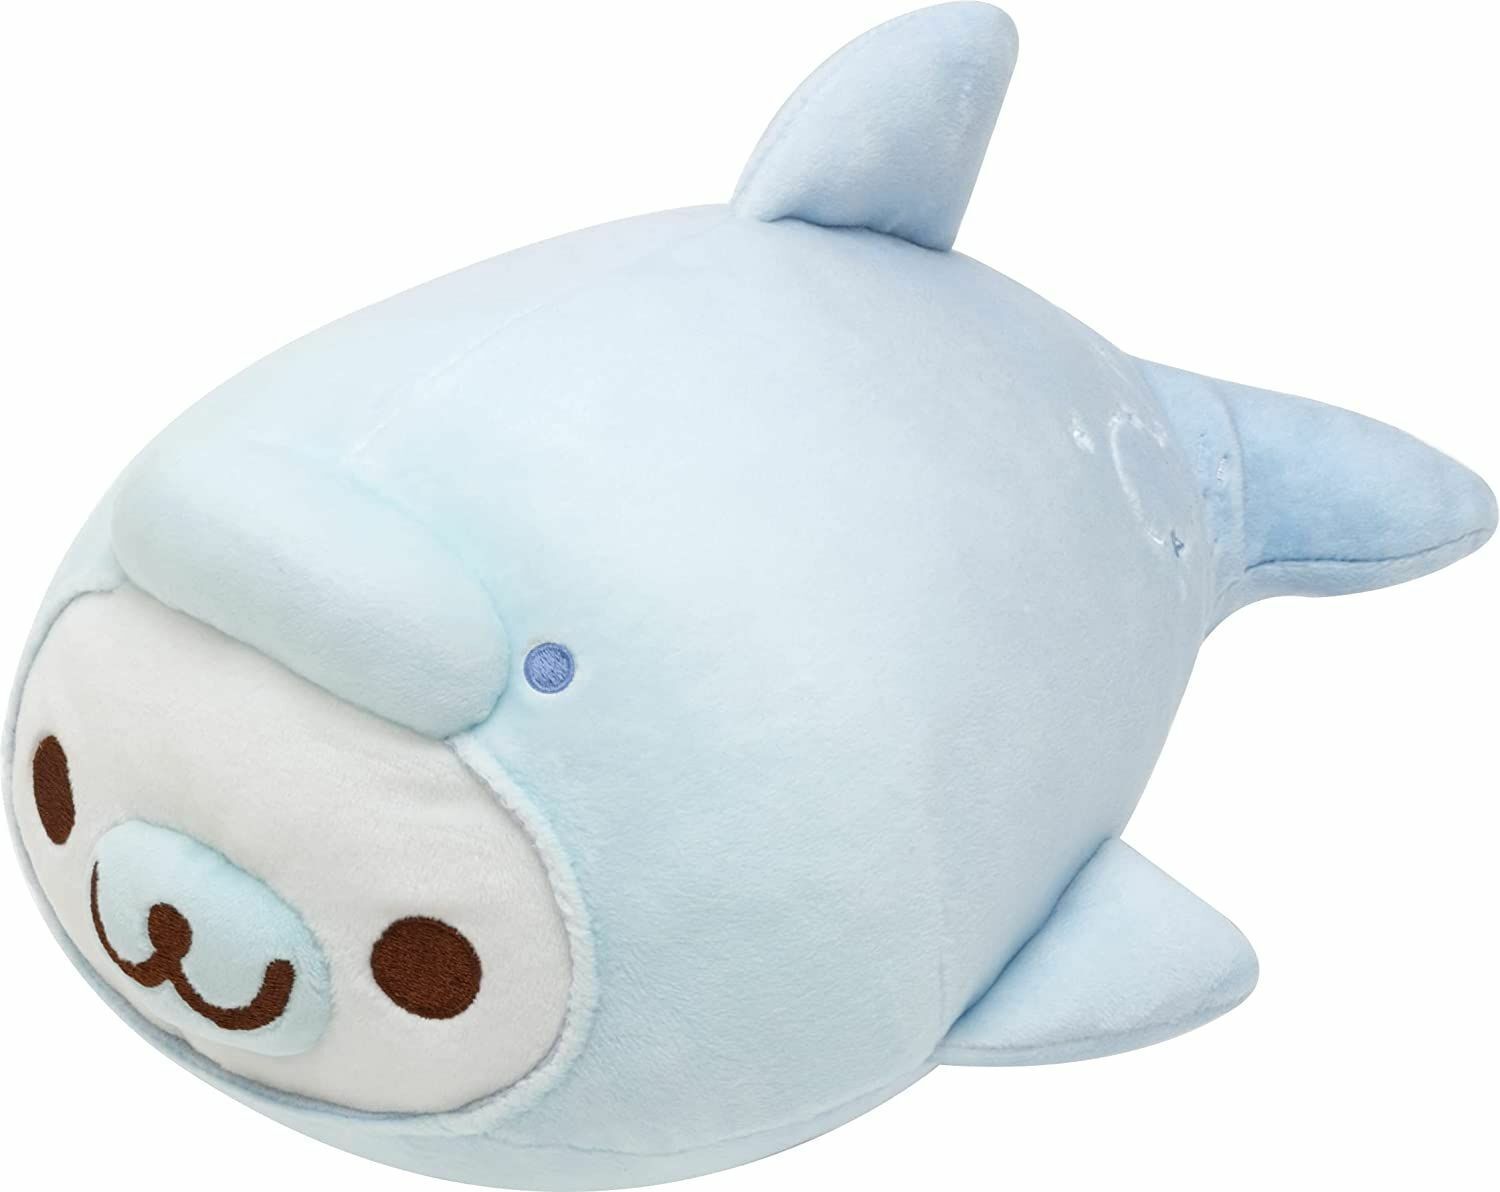 San-X Character Mamegoma Stuffed Toy M Size 25cm Plush Doll White Dolphin Cute